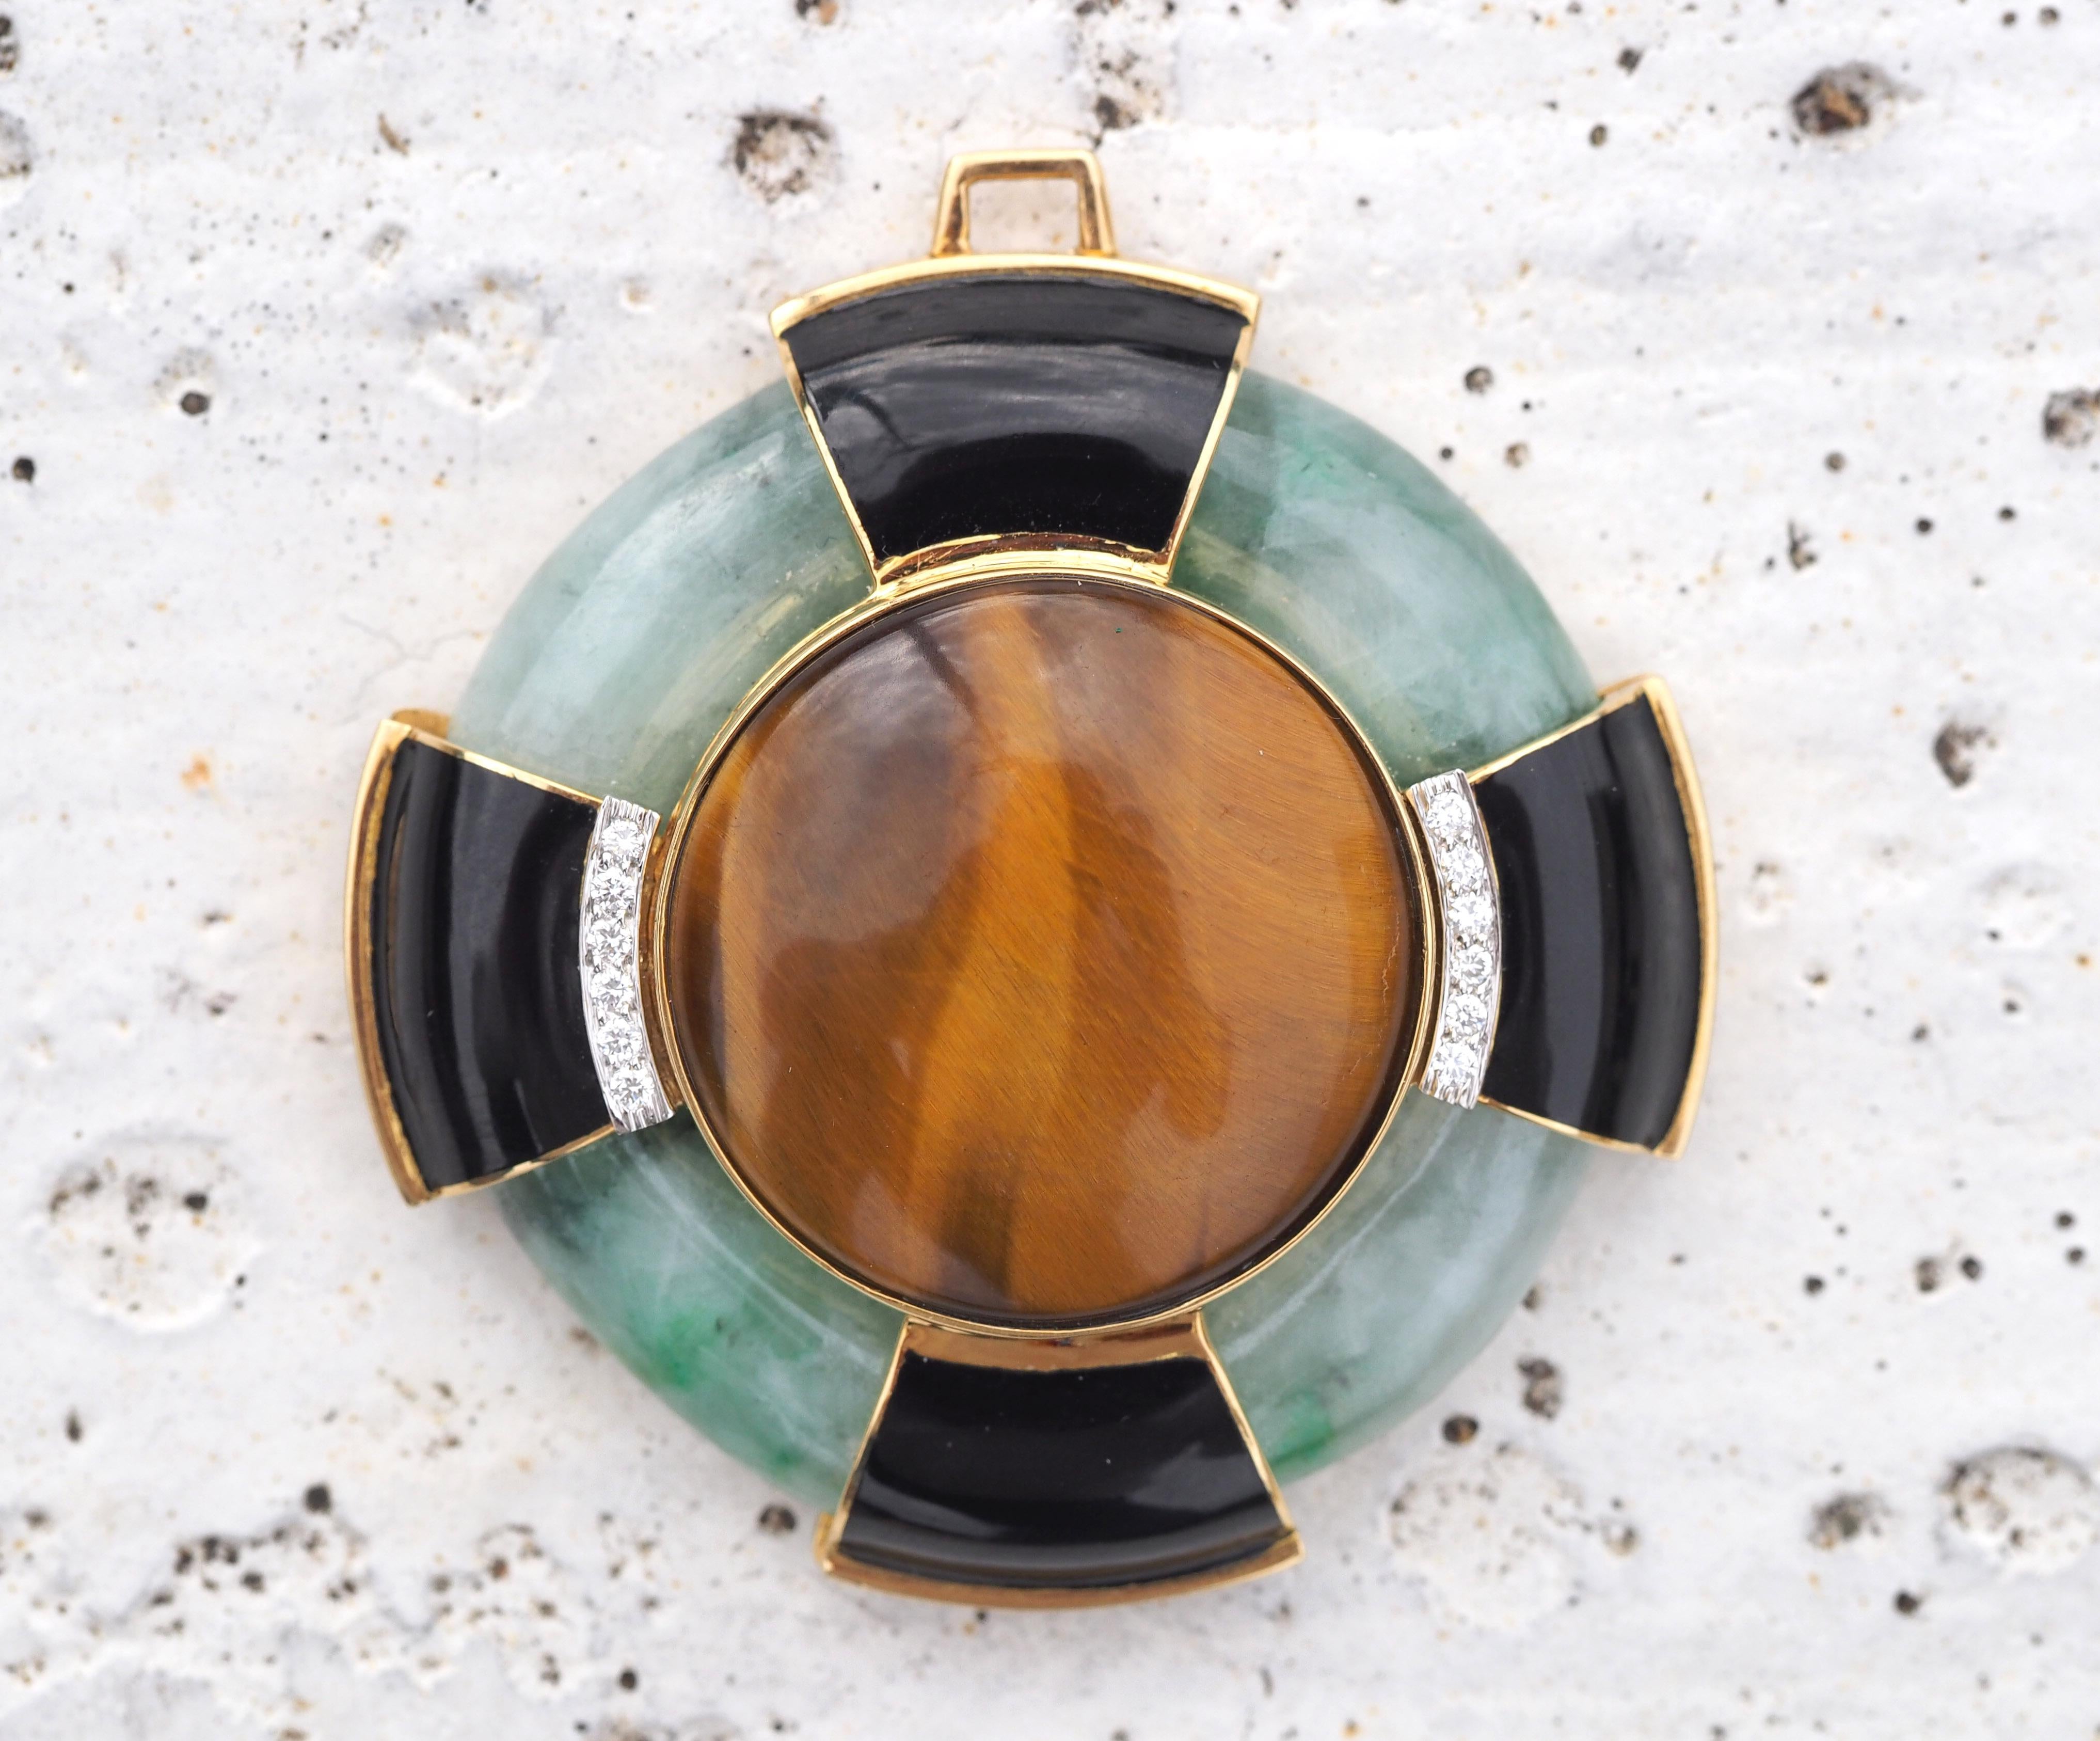 Vintage David Webb Authentic 18k Yellow Gold and Platinum Pendant with Tiger's Eye, Jade, Black Onyx, and Round Brilliant Cut Diamonds.

This unique piece is without a doubt, a 